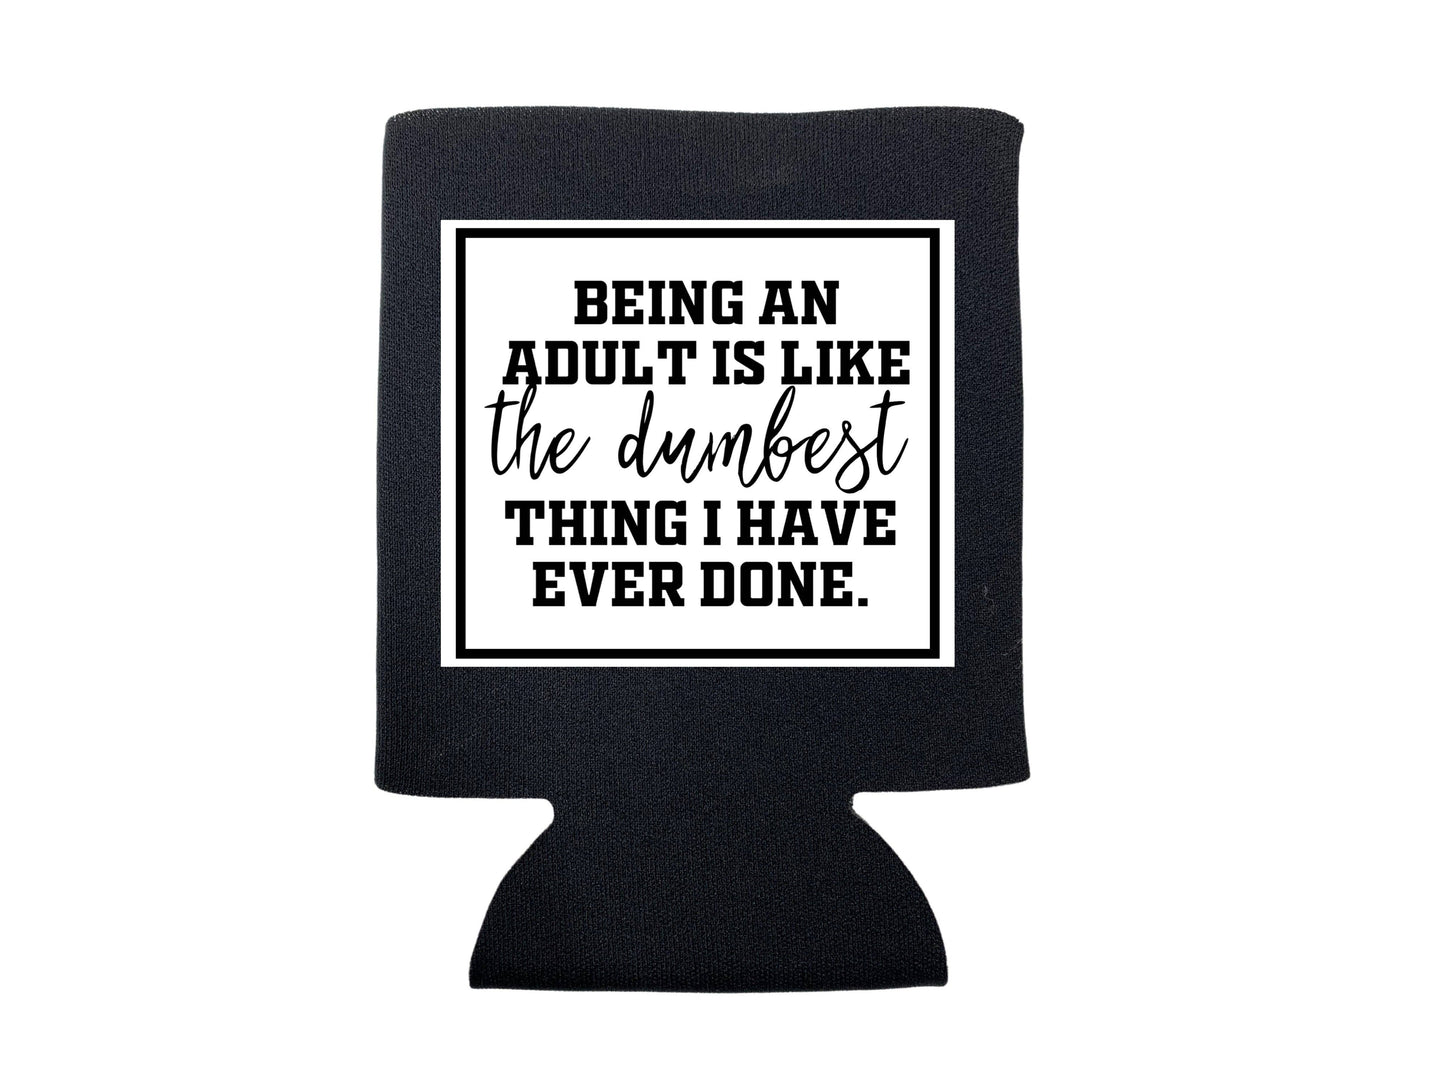 dkhandmade - BEING AN ADULT IS LIKE THE DUMBEST THING I HAVE EVERY DONE KOOZIE